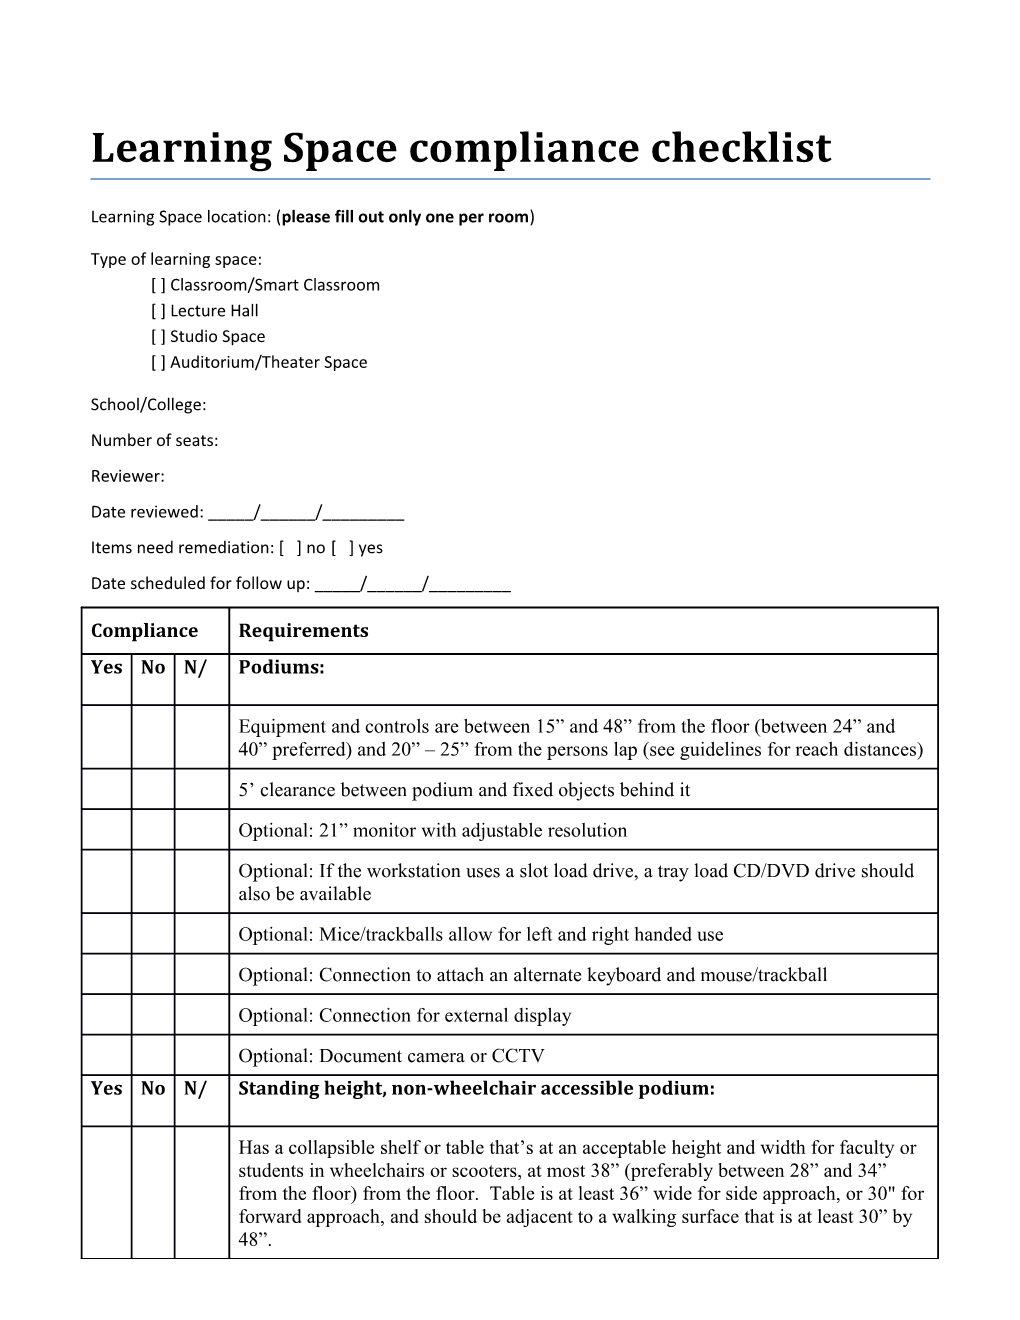 Learning Space Compliance Checklist